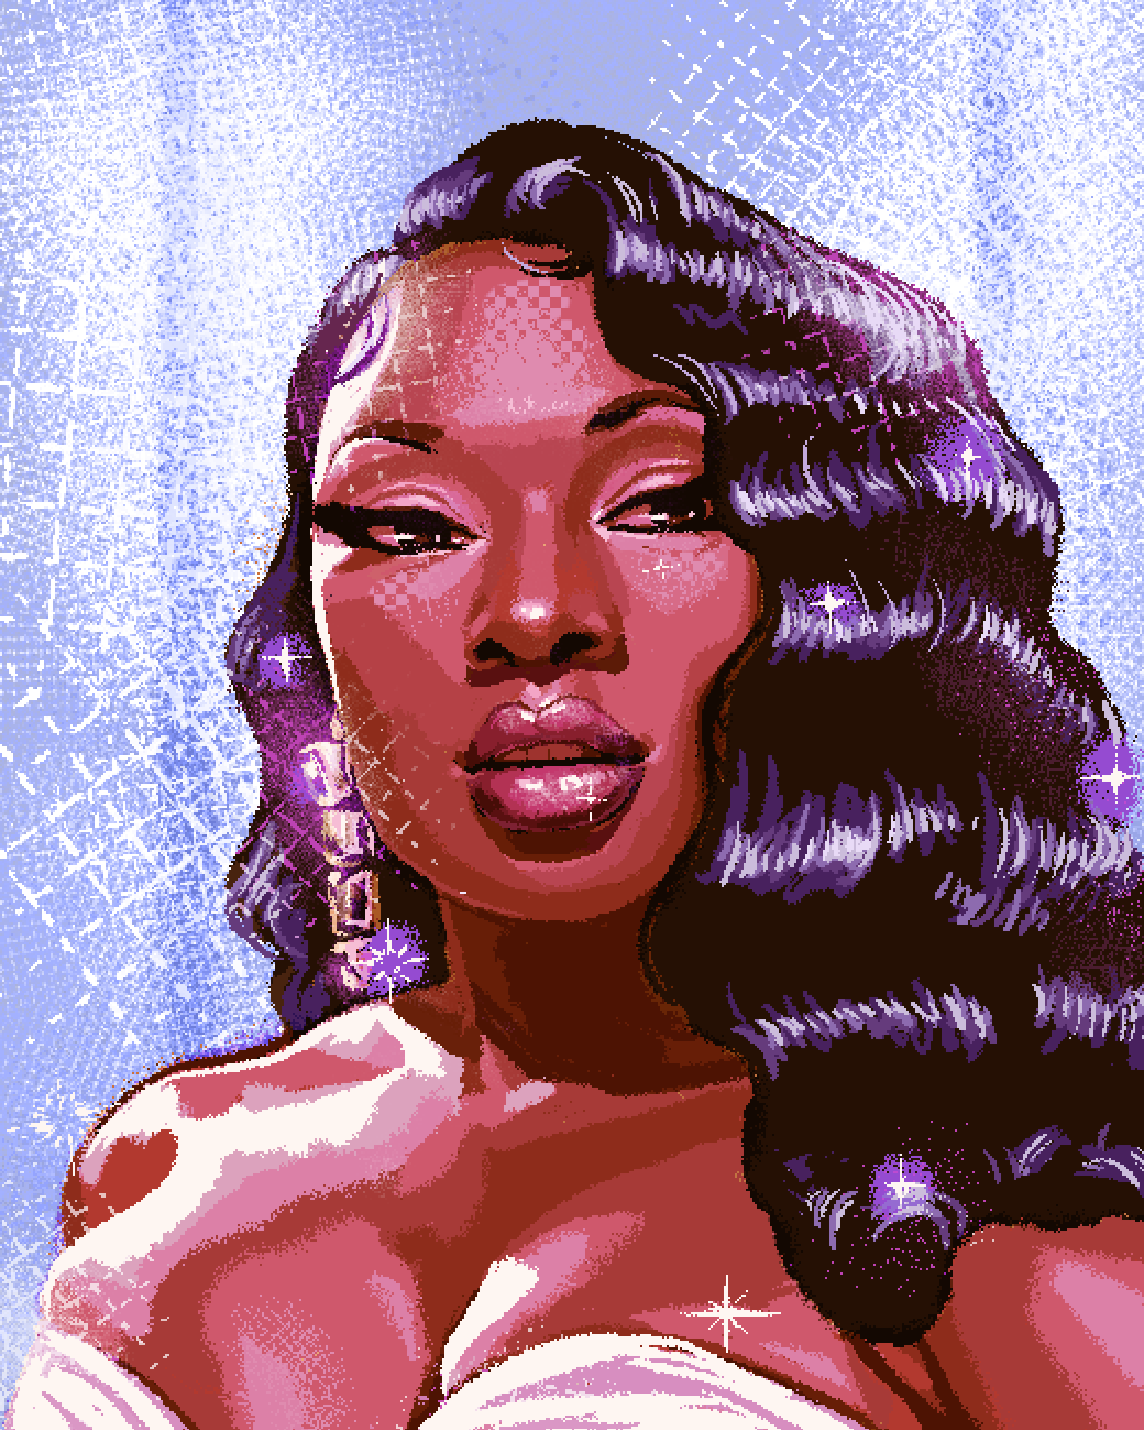 Pixel art portrait of Megan Thee Stallion. She is wearing a white strapless dress and her hair is long wavy and black. The color palette is blue, lavender, purple, and a soft orange for her skin tone.